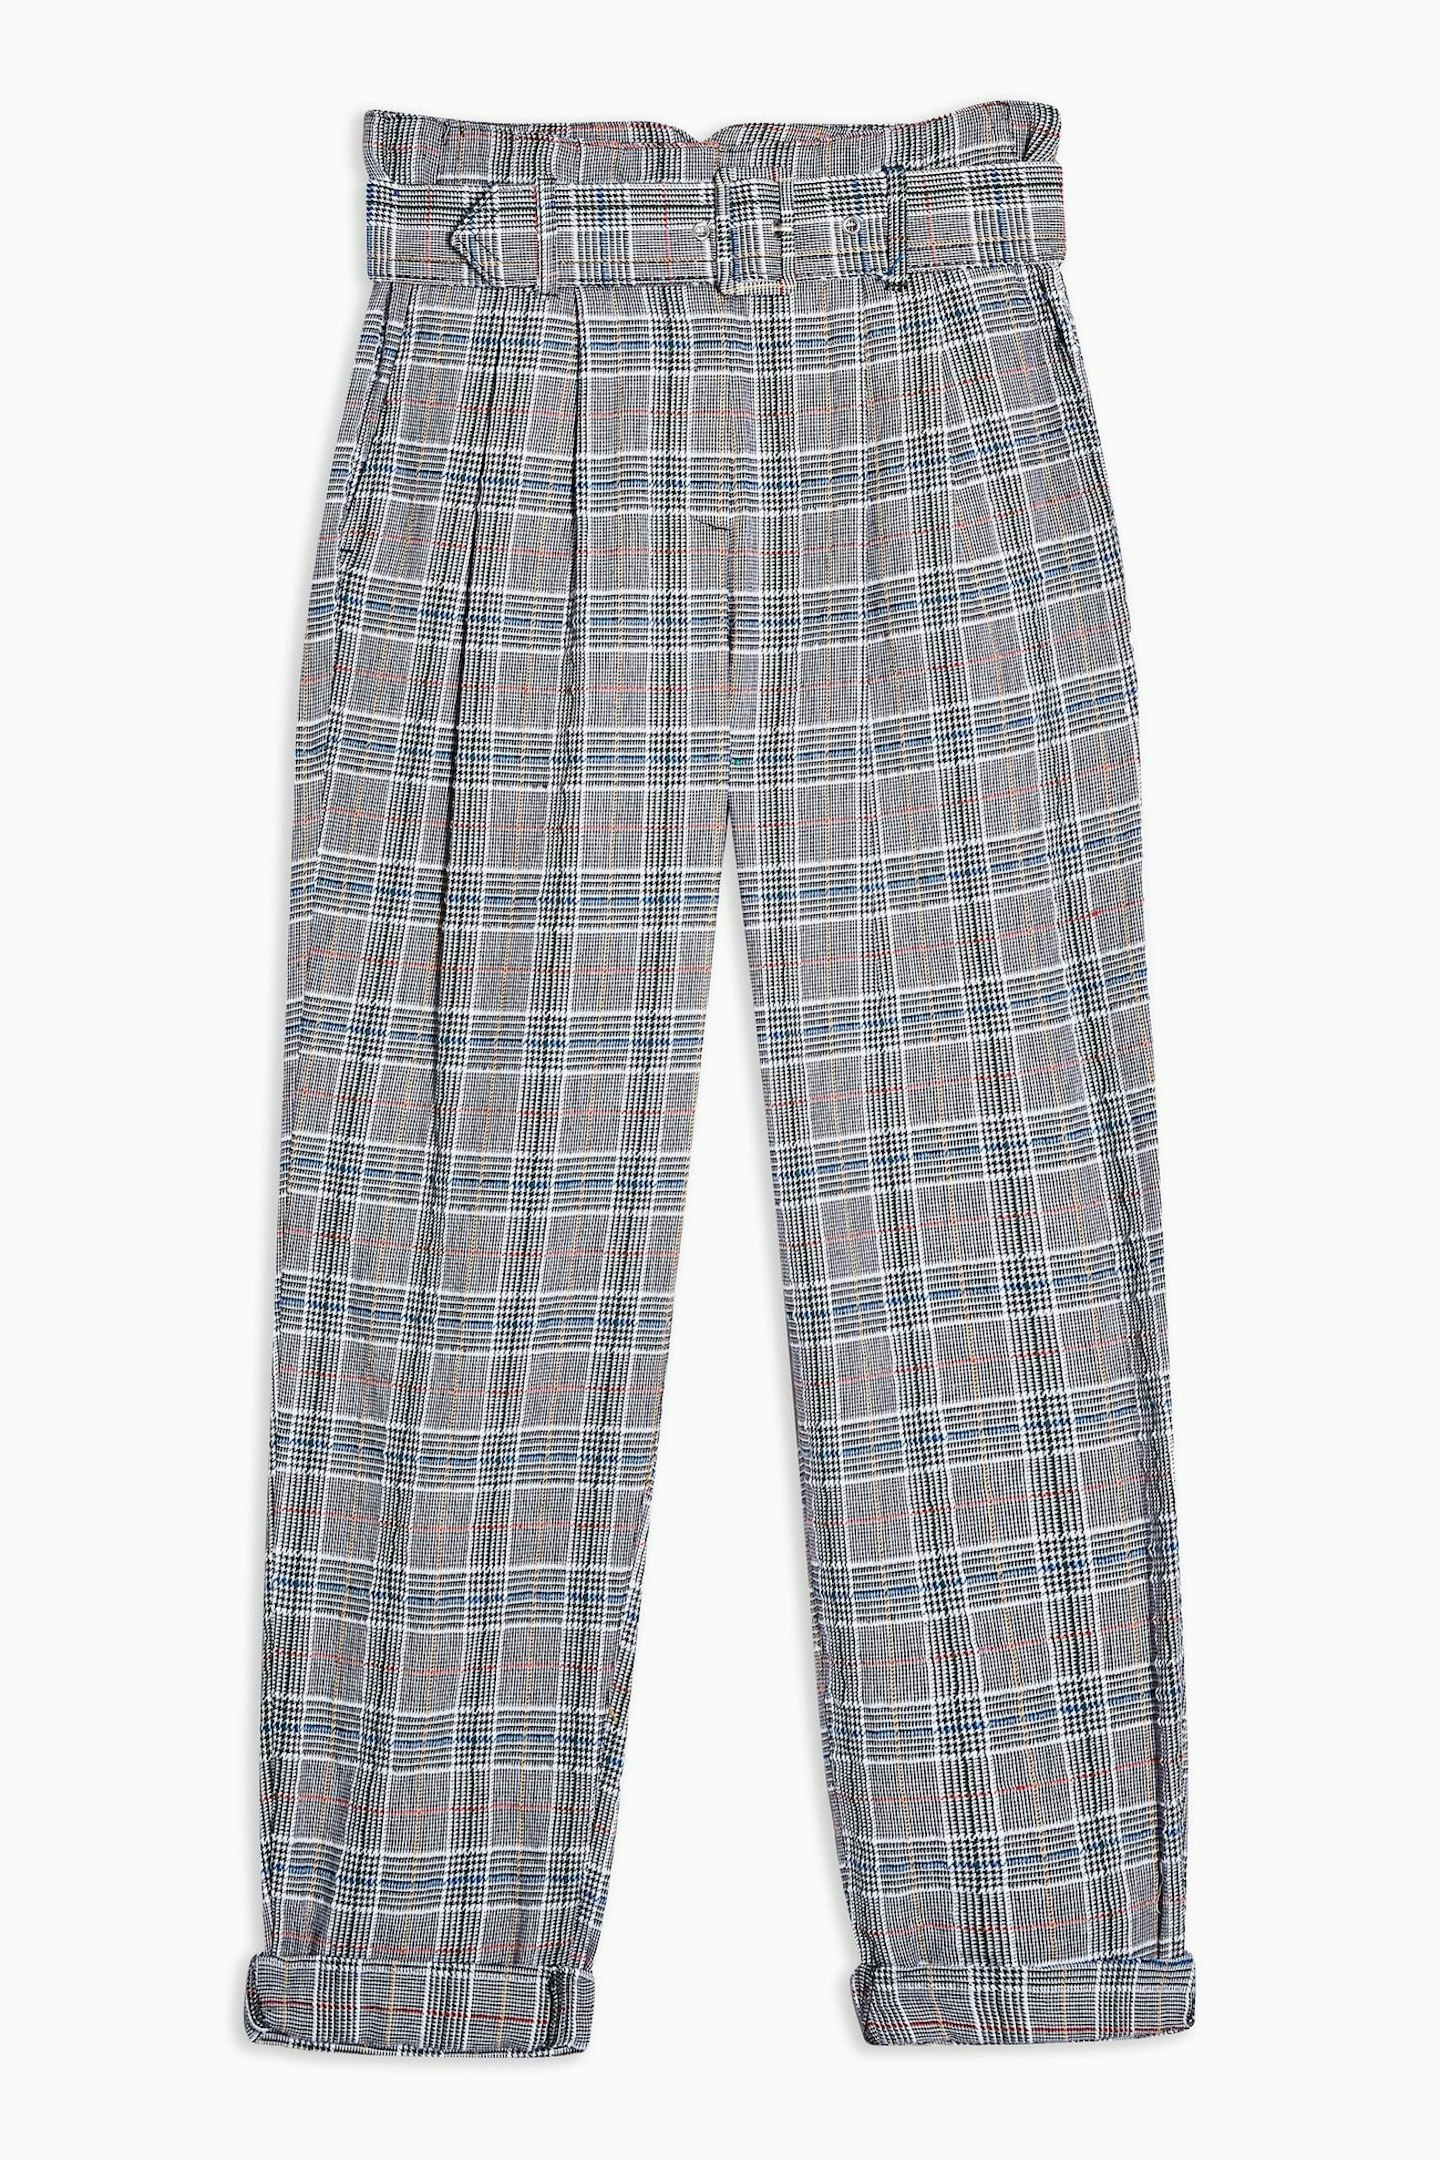 Topshop, Checked Trousers